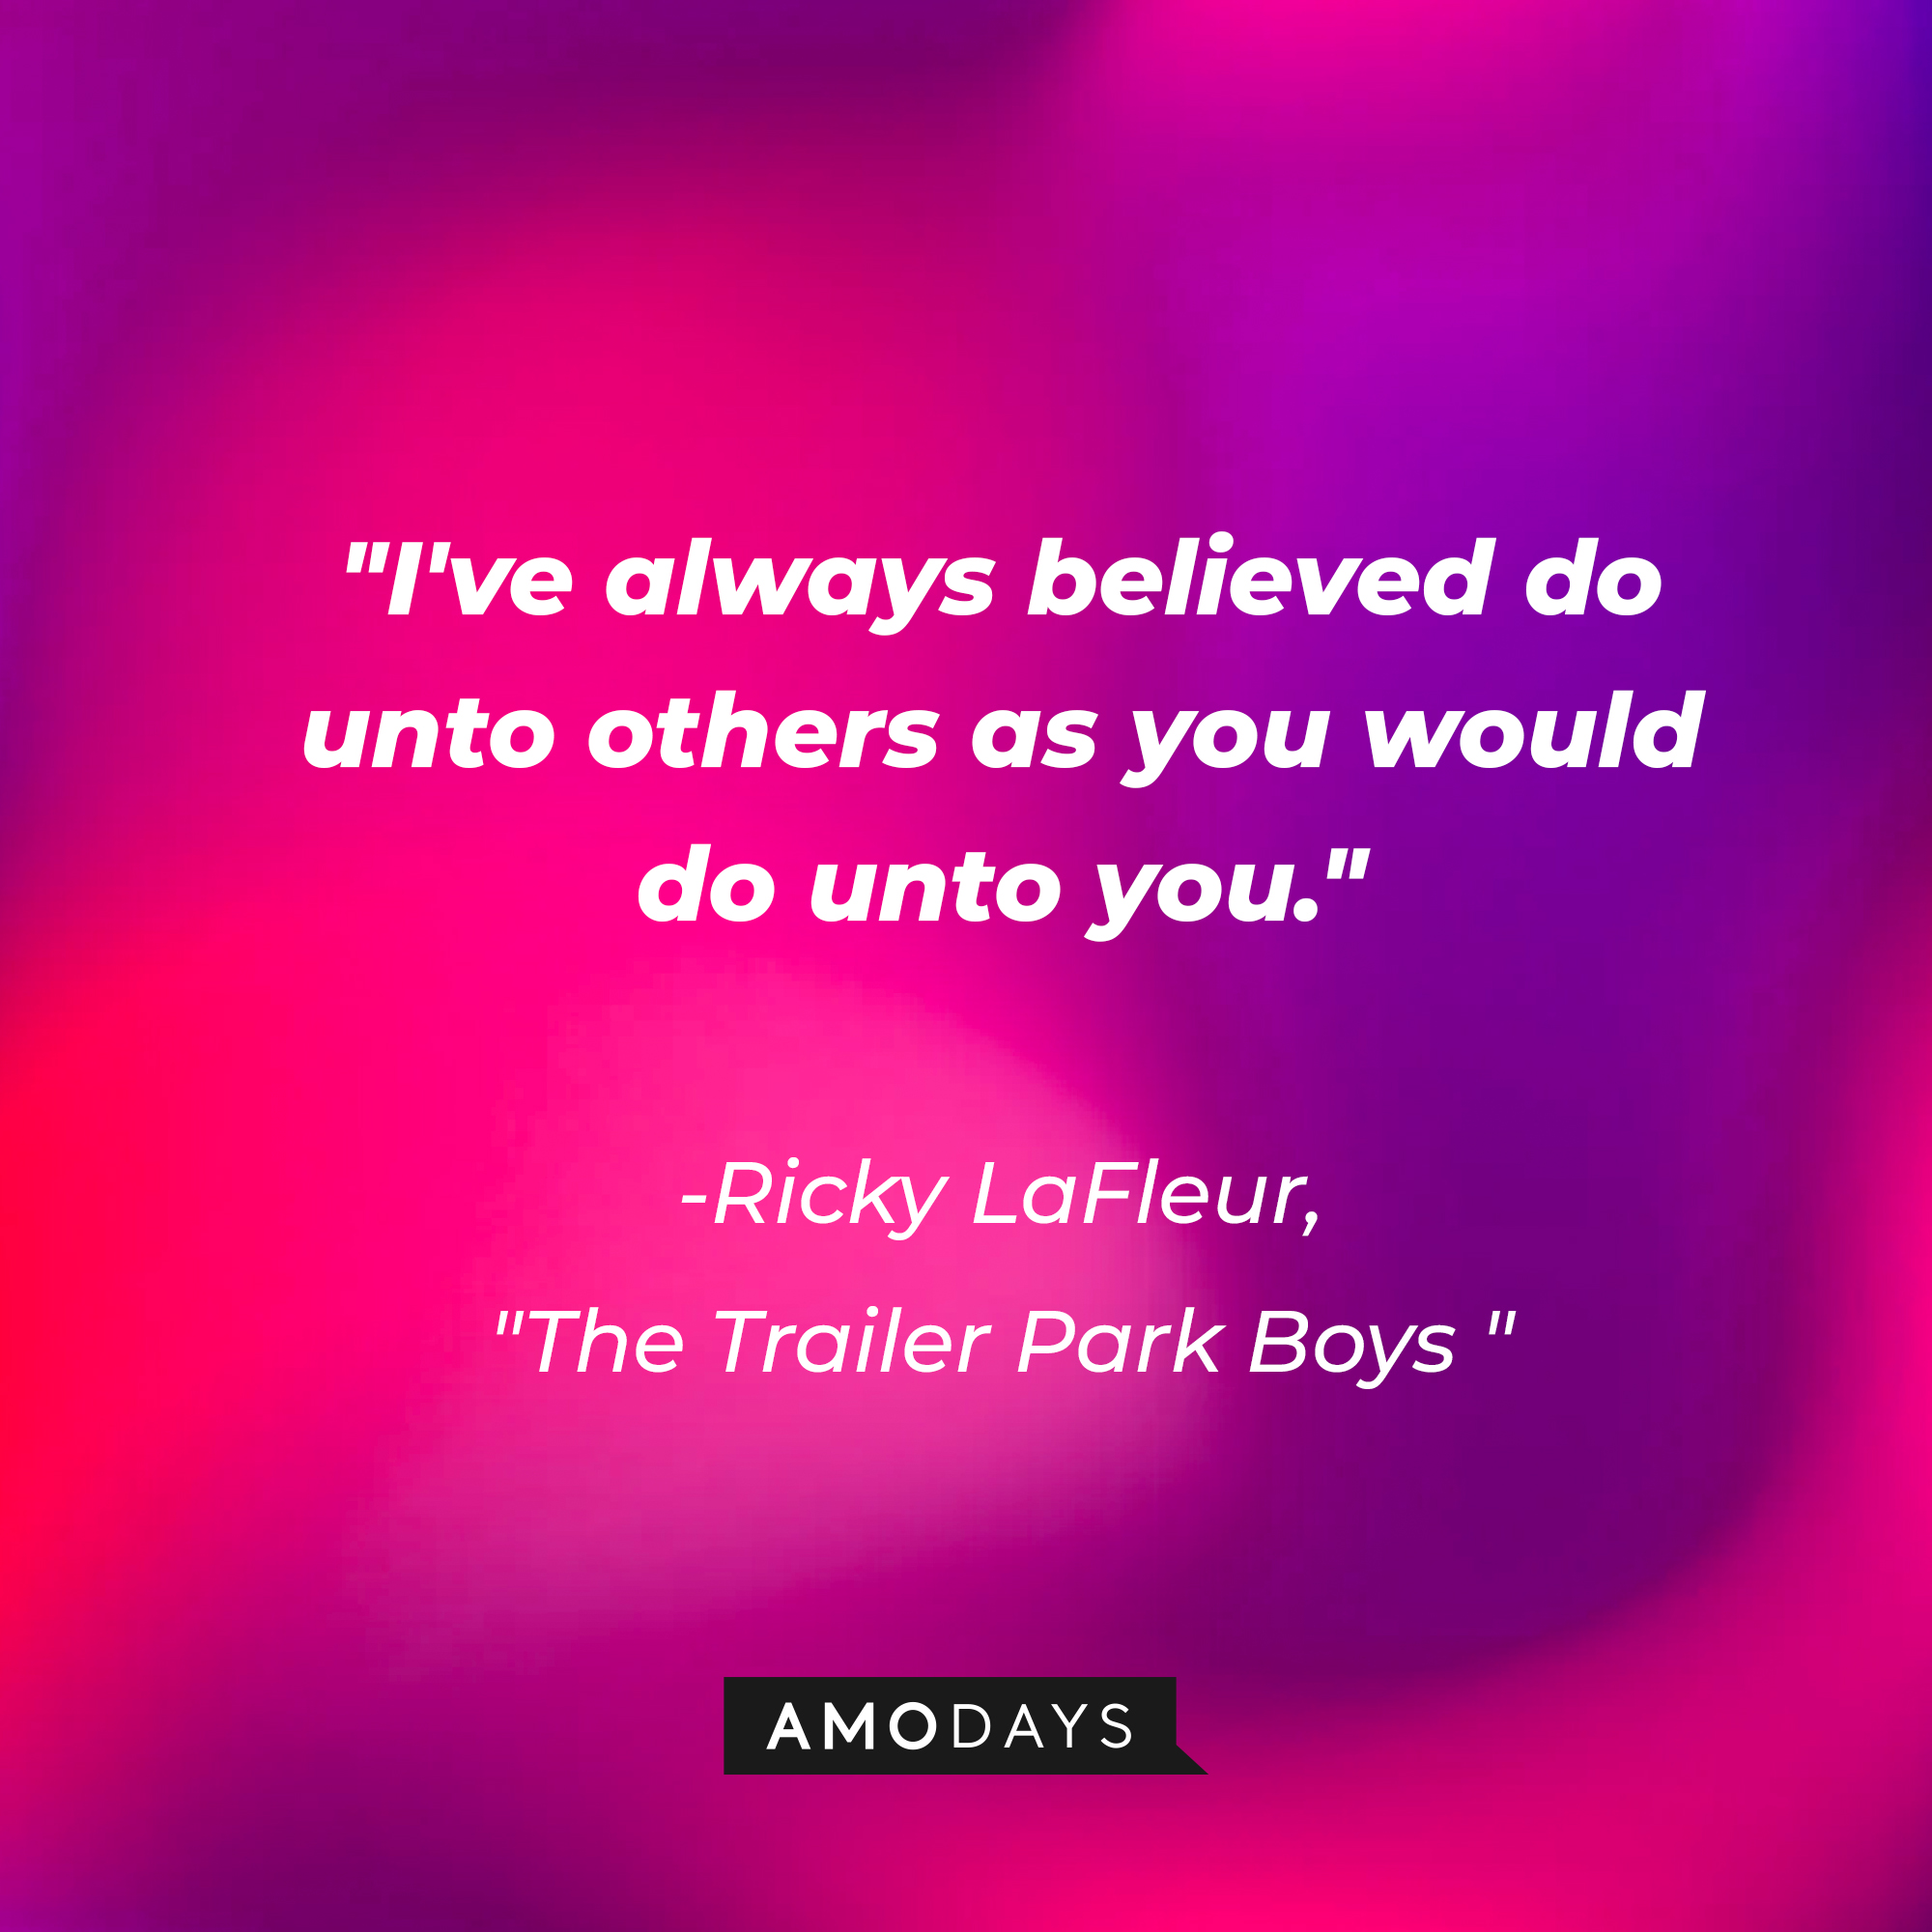 Ricky LaFleur with his quote: "I've always believed do unto others as you would do unto you." | Source: AmoDays